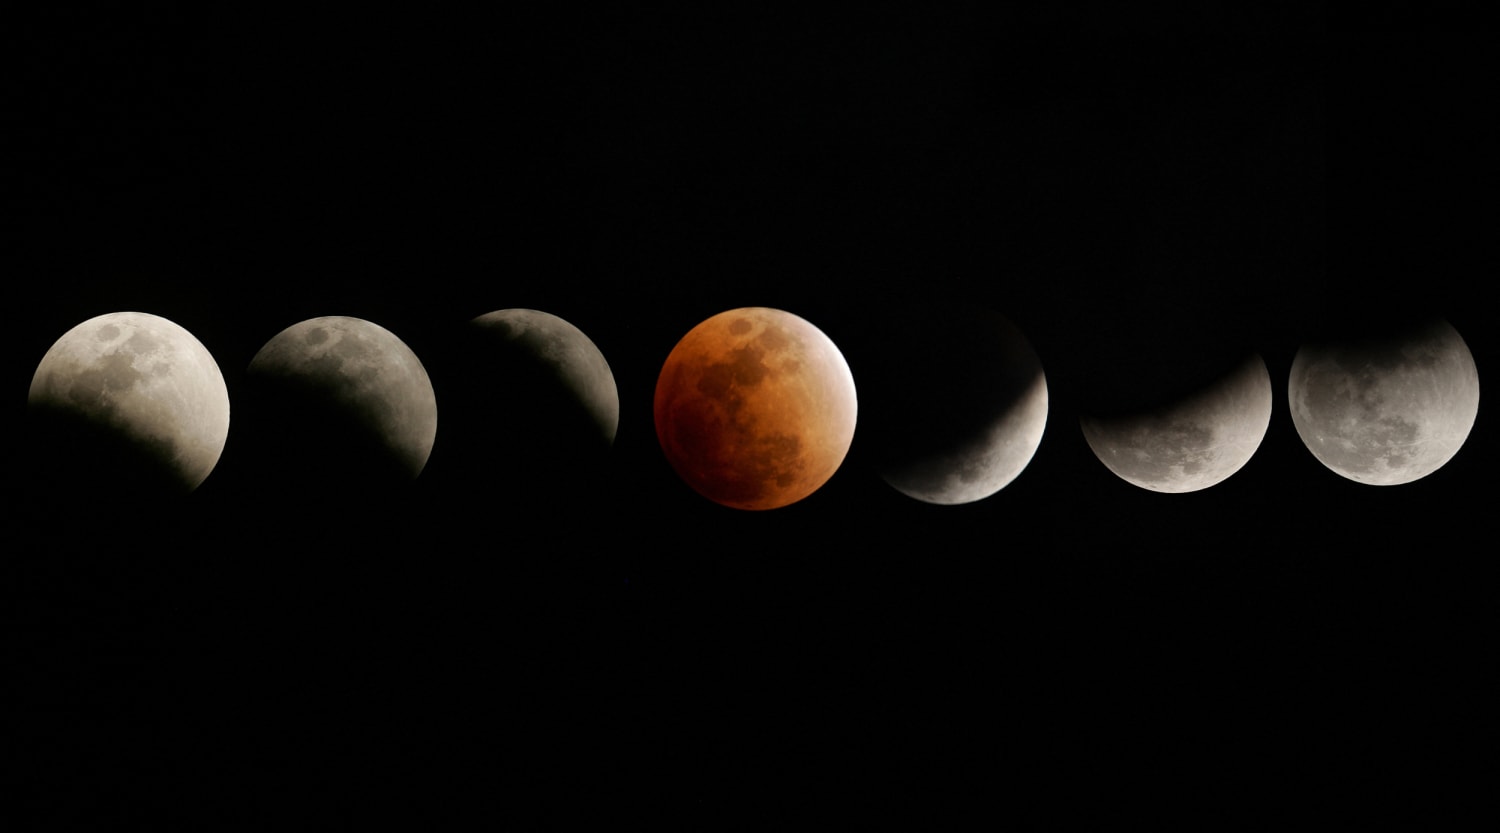 lunar eclipse from the moon